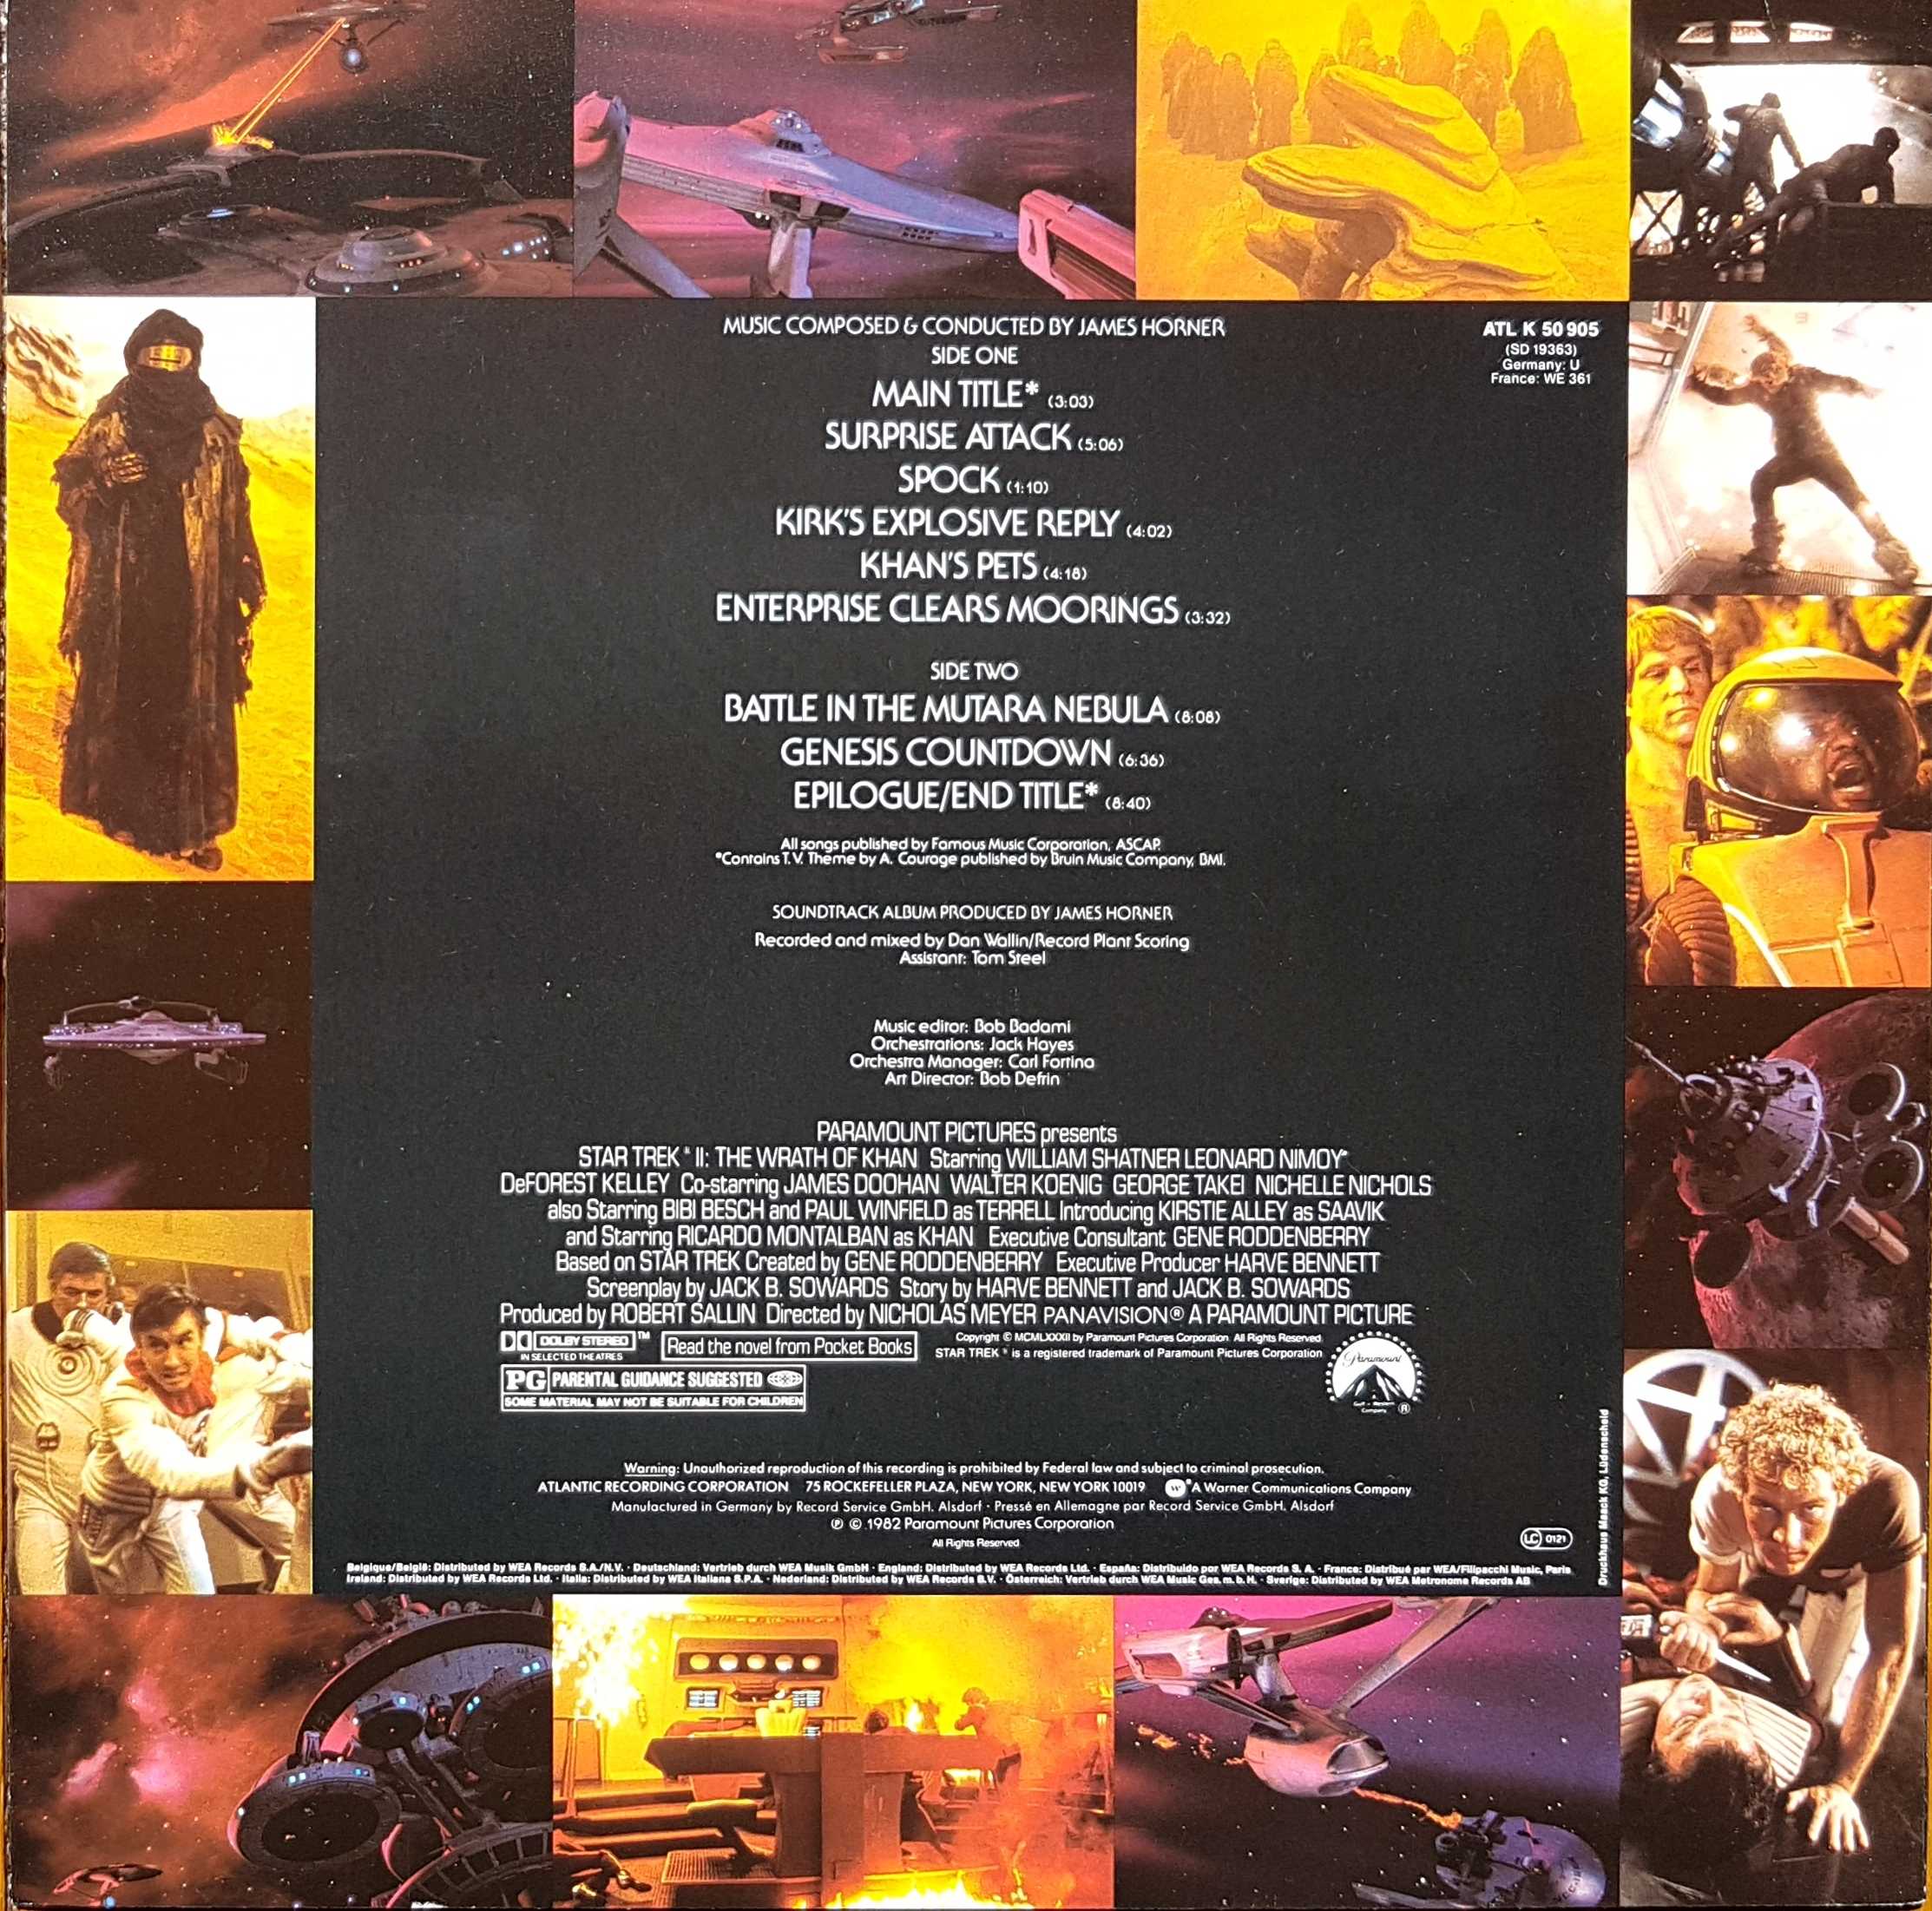 Picture of ATLK 50905 Star trek - The wrath of Khan by artist James Horner from the BBC records and Tapes library